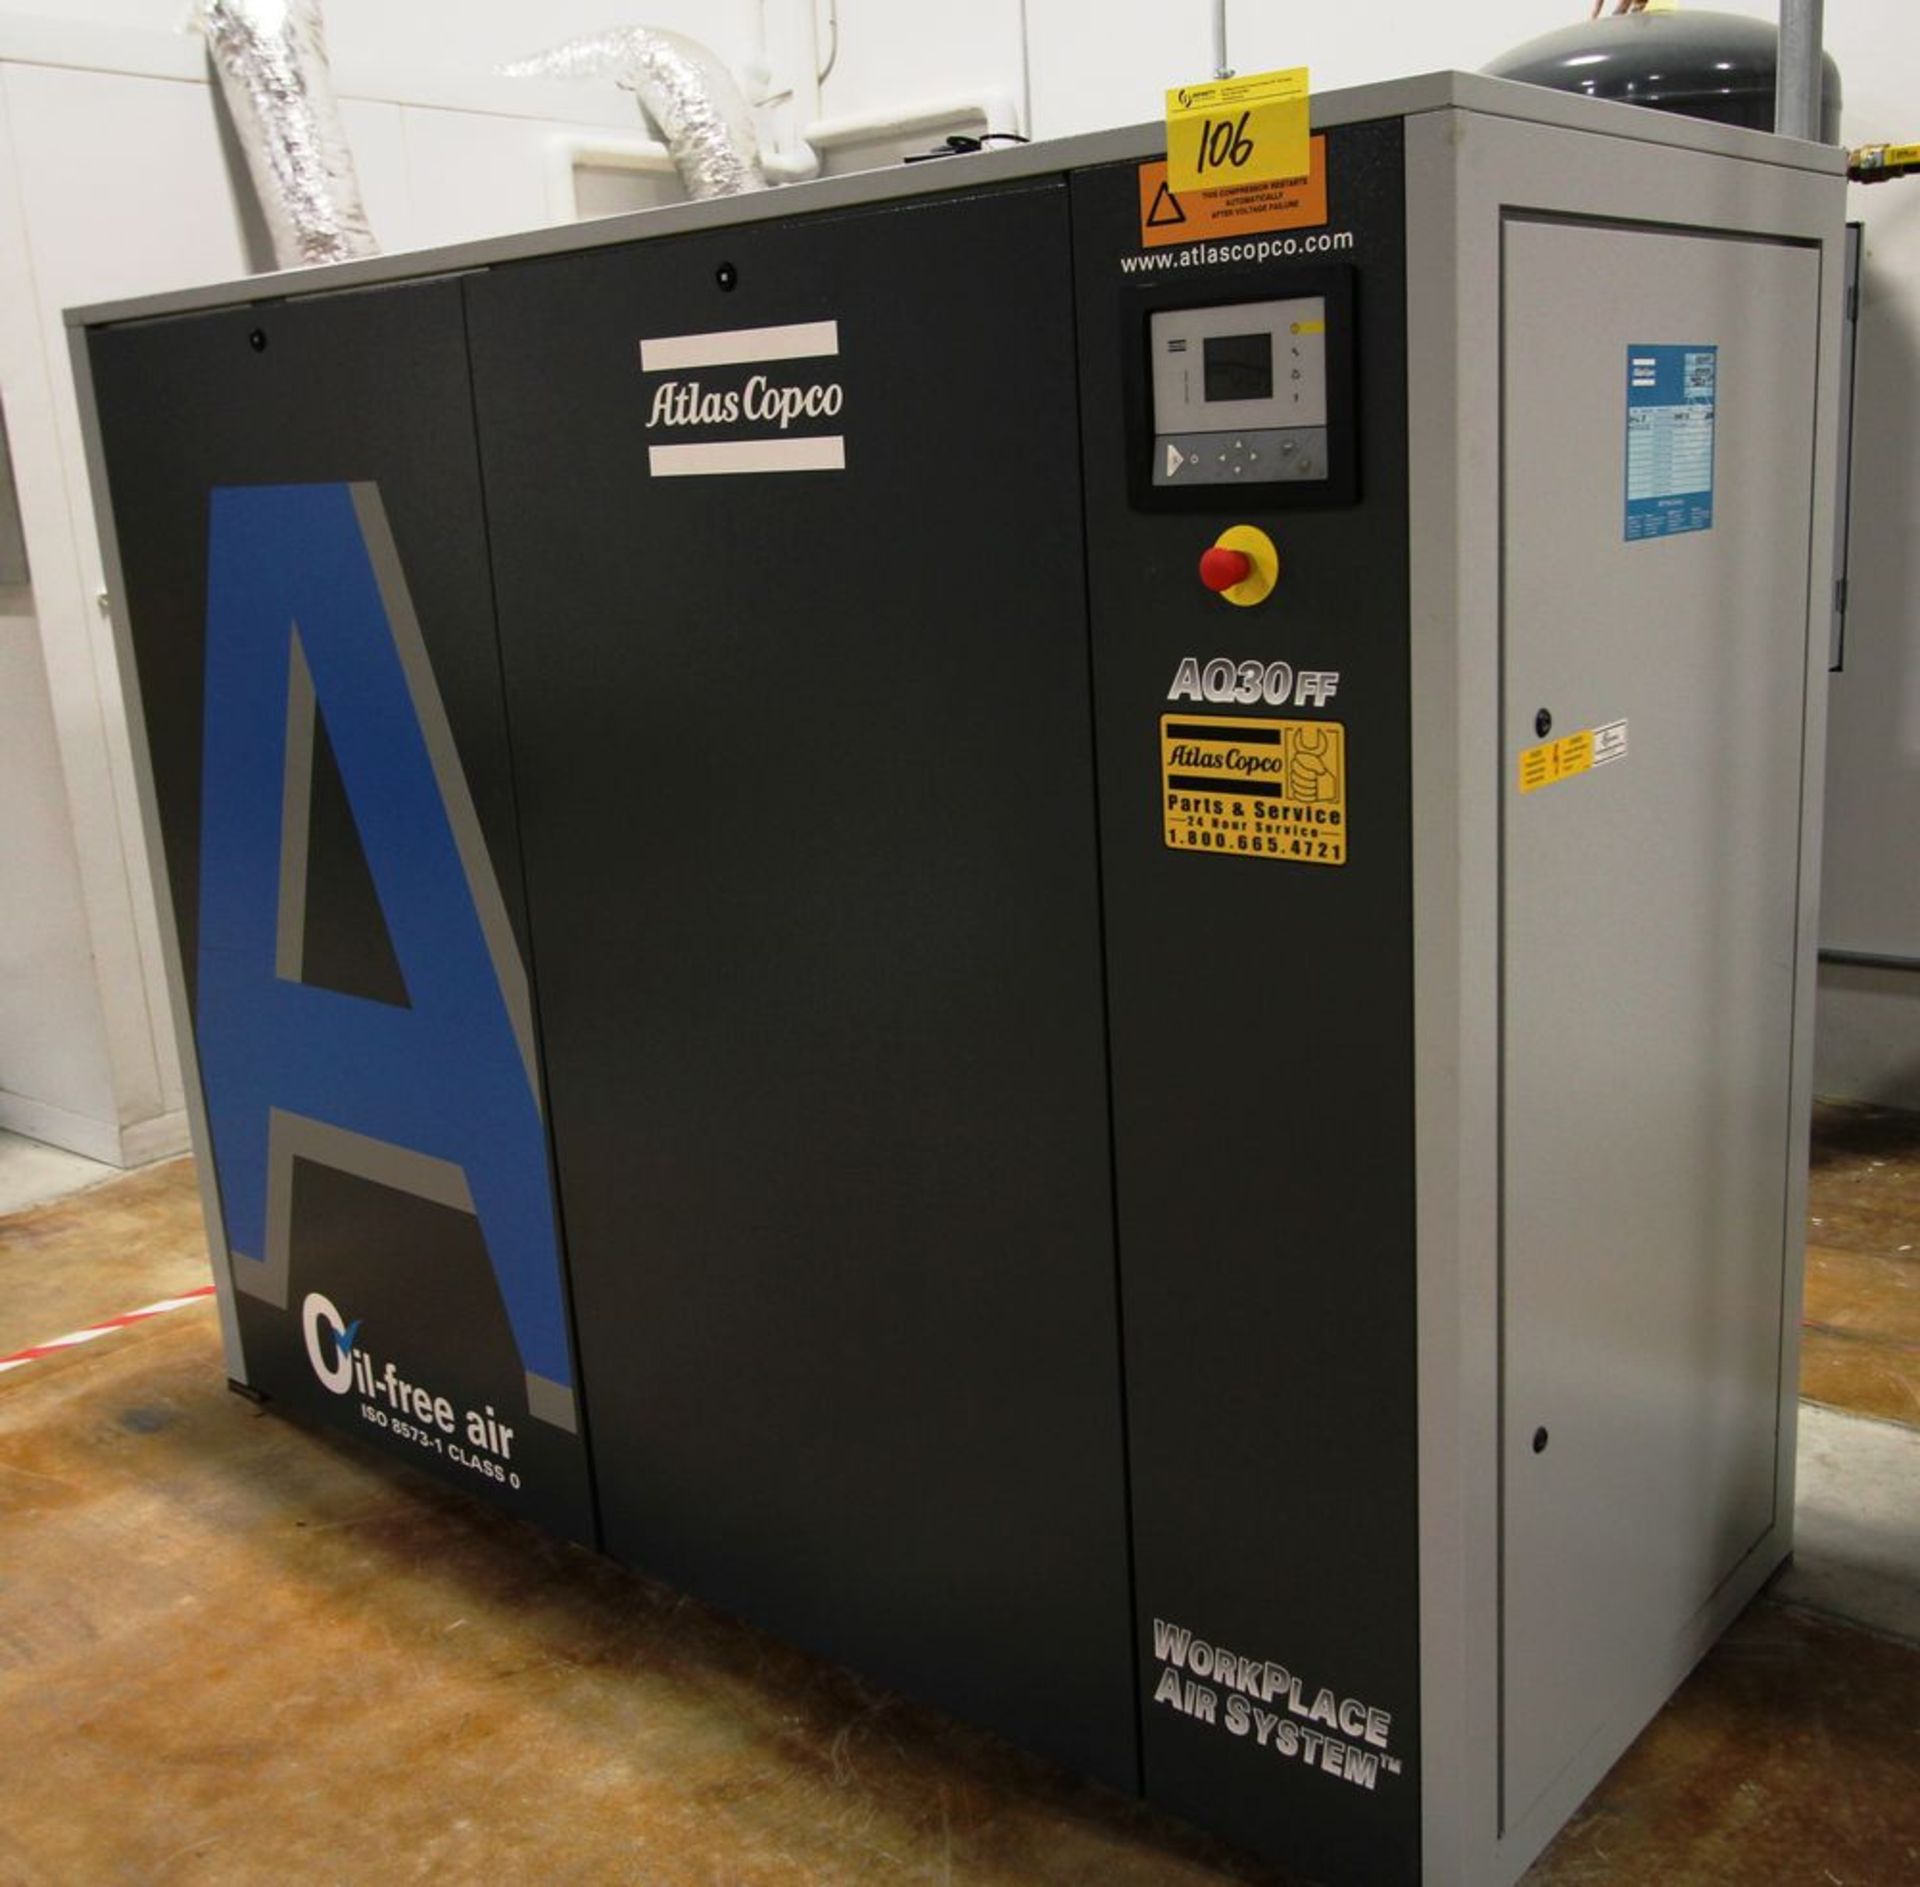 2016 ATLAS COPCO AQ30 WORK PLACE AIR SYSTEM AIR COMPRESSOR, OIL FREE, ISO 8573-1, CLASS B, 40HP,